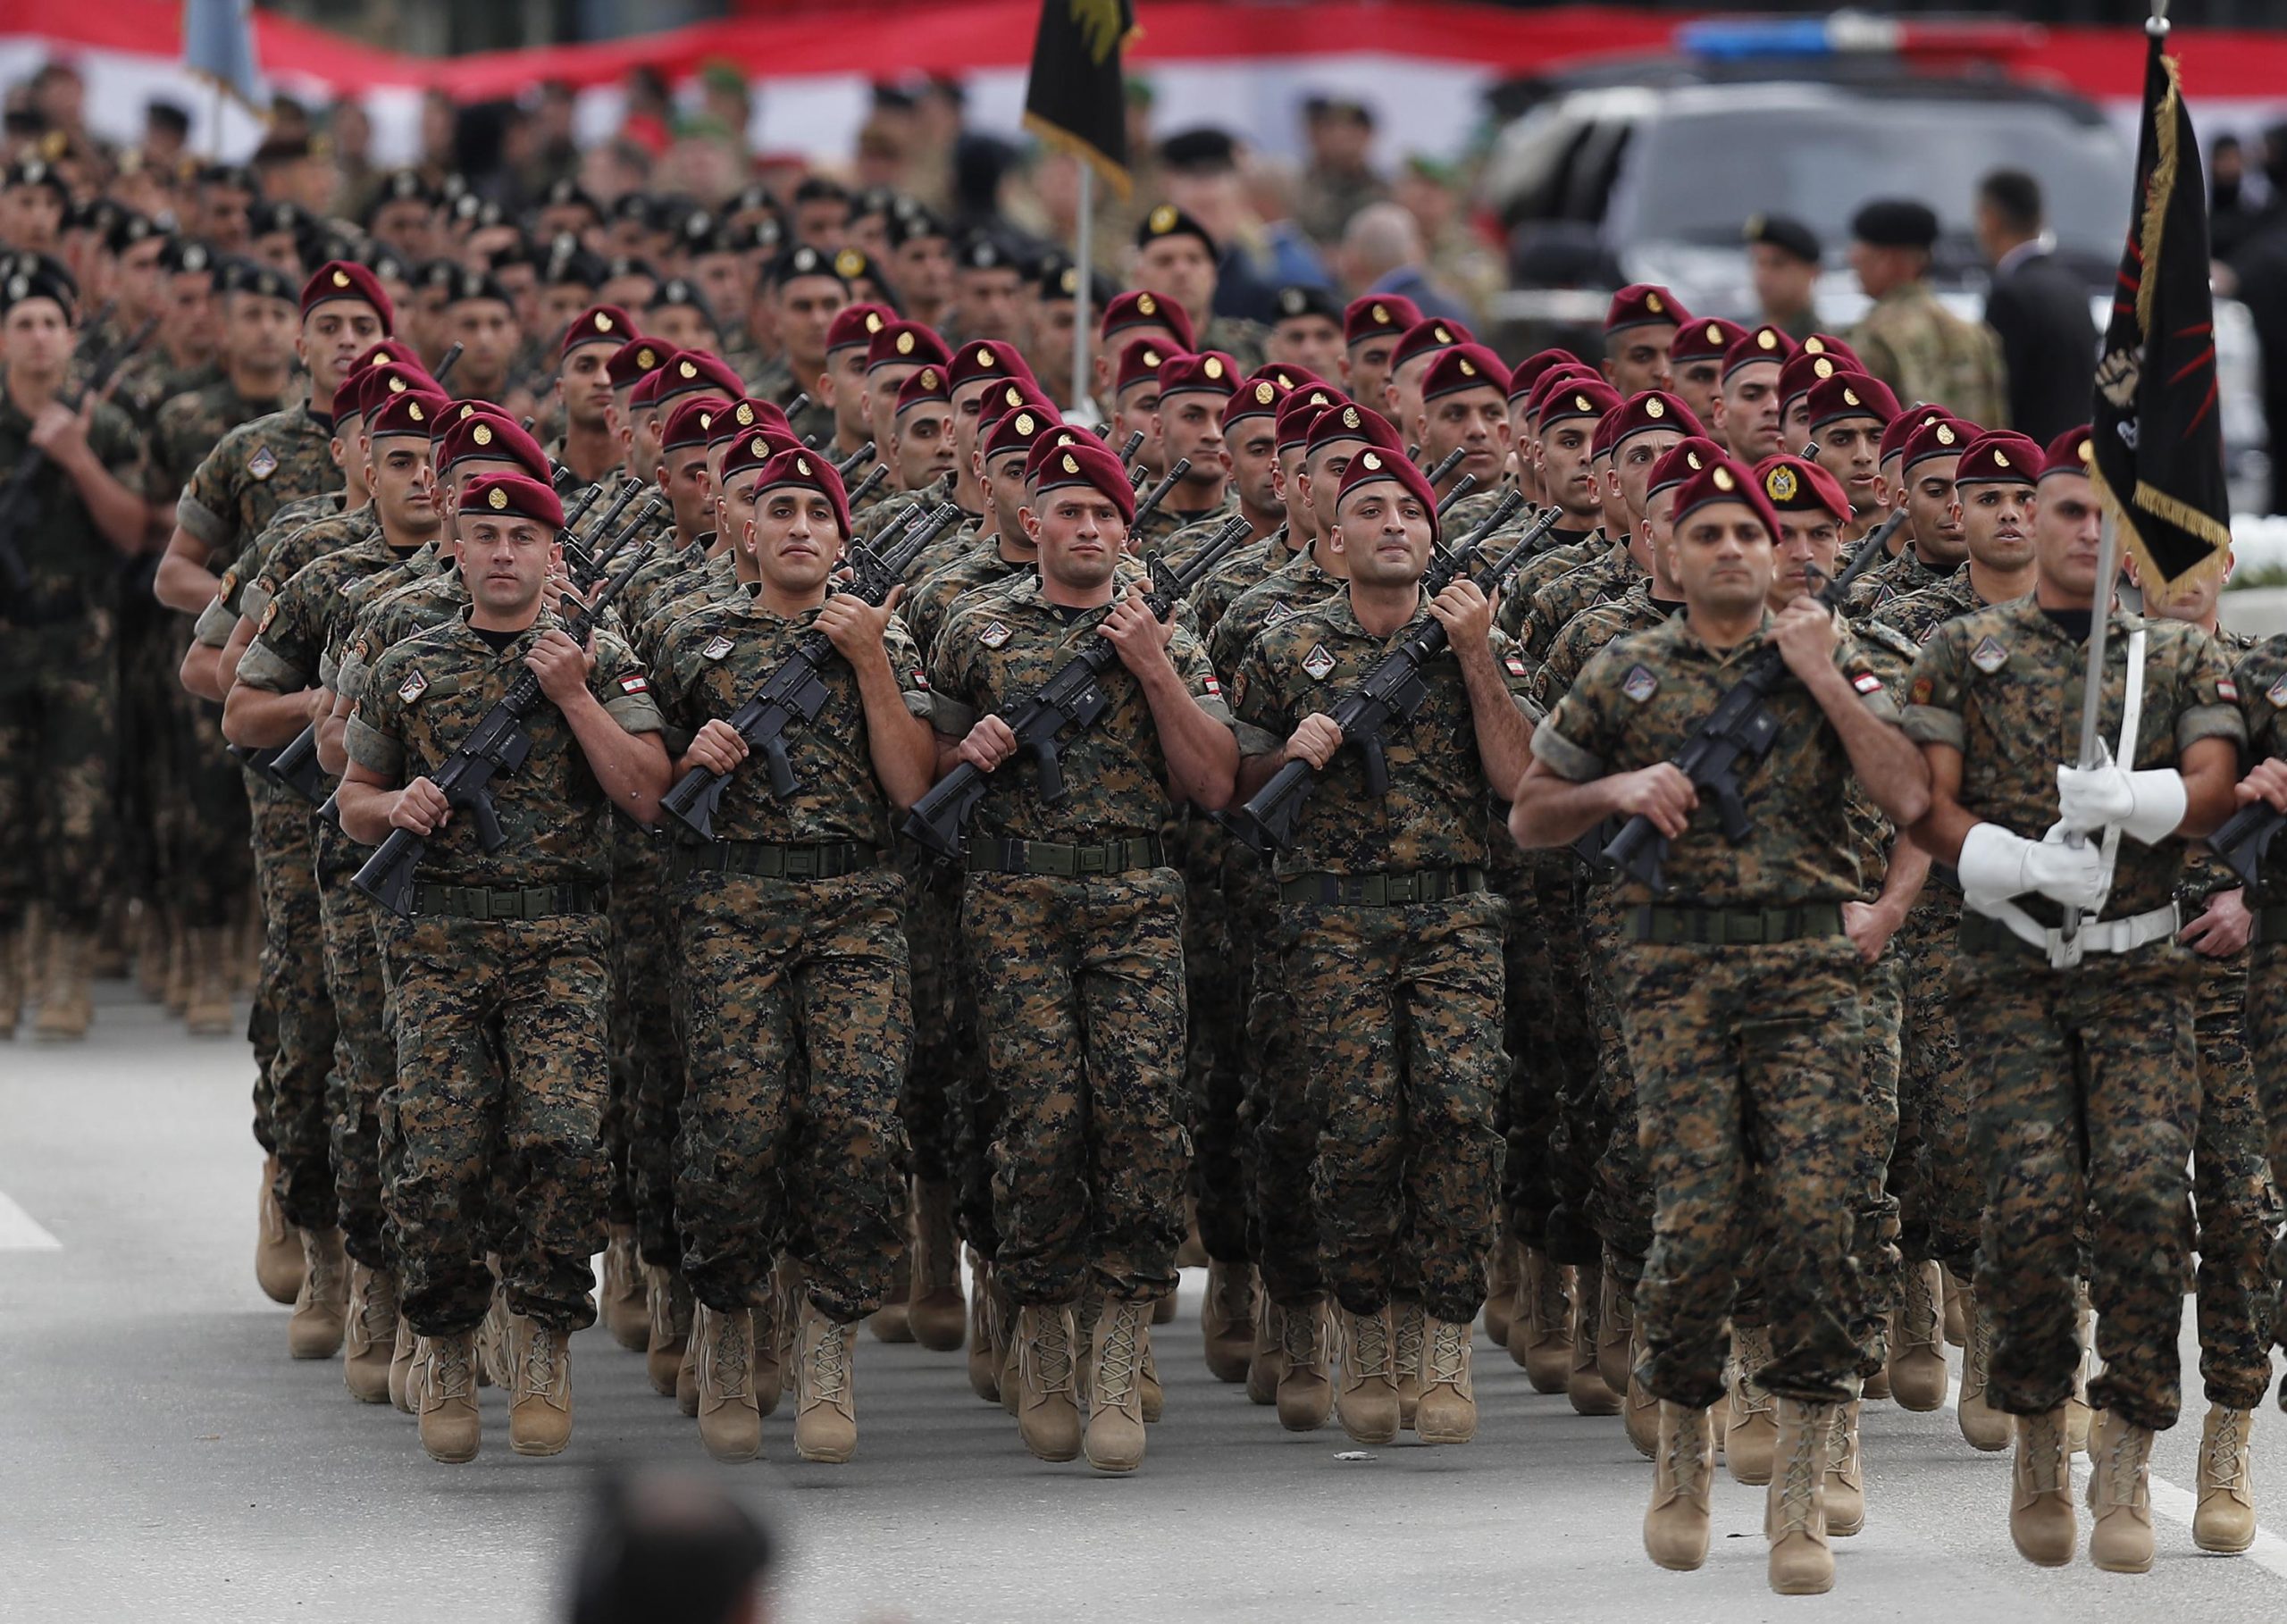 Lebanese Army Receives First Batch of Qatar's Financial Support